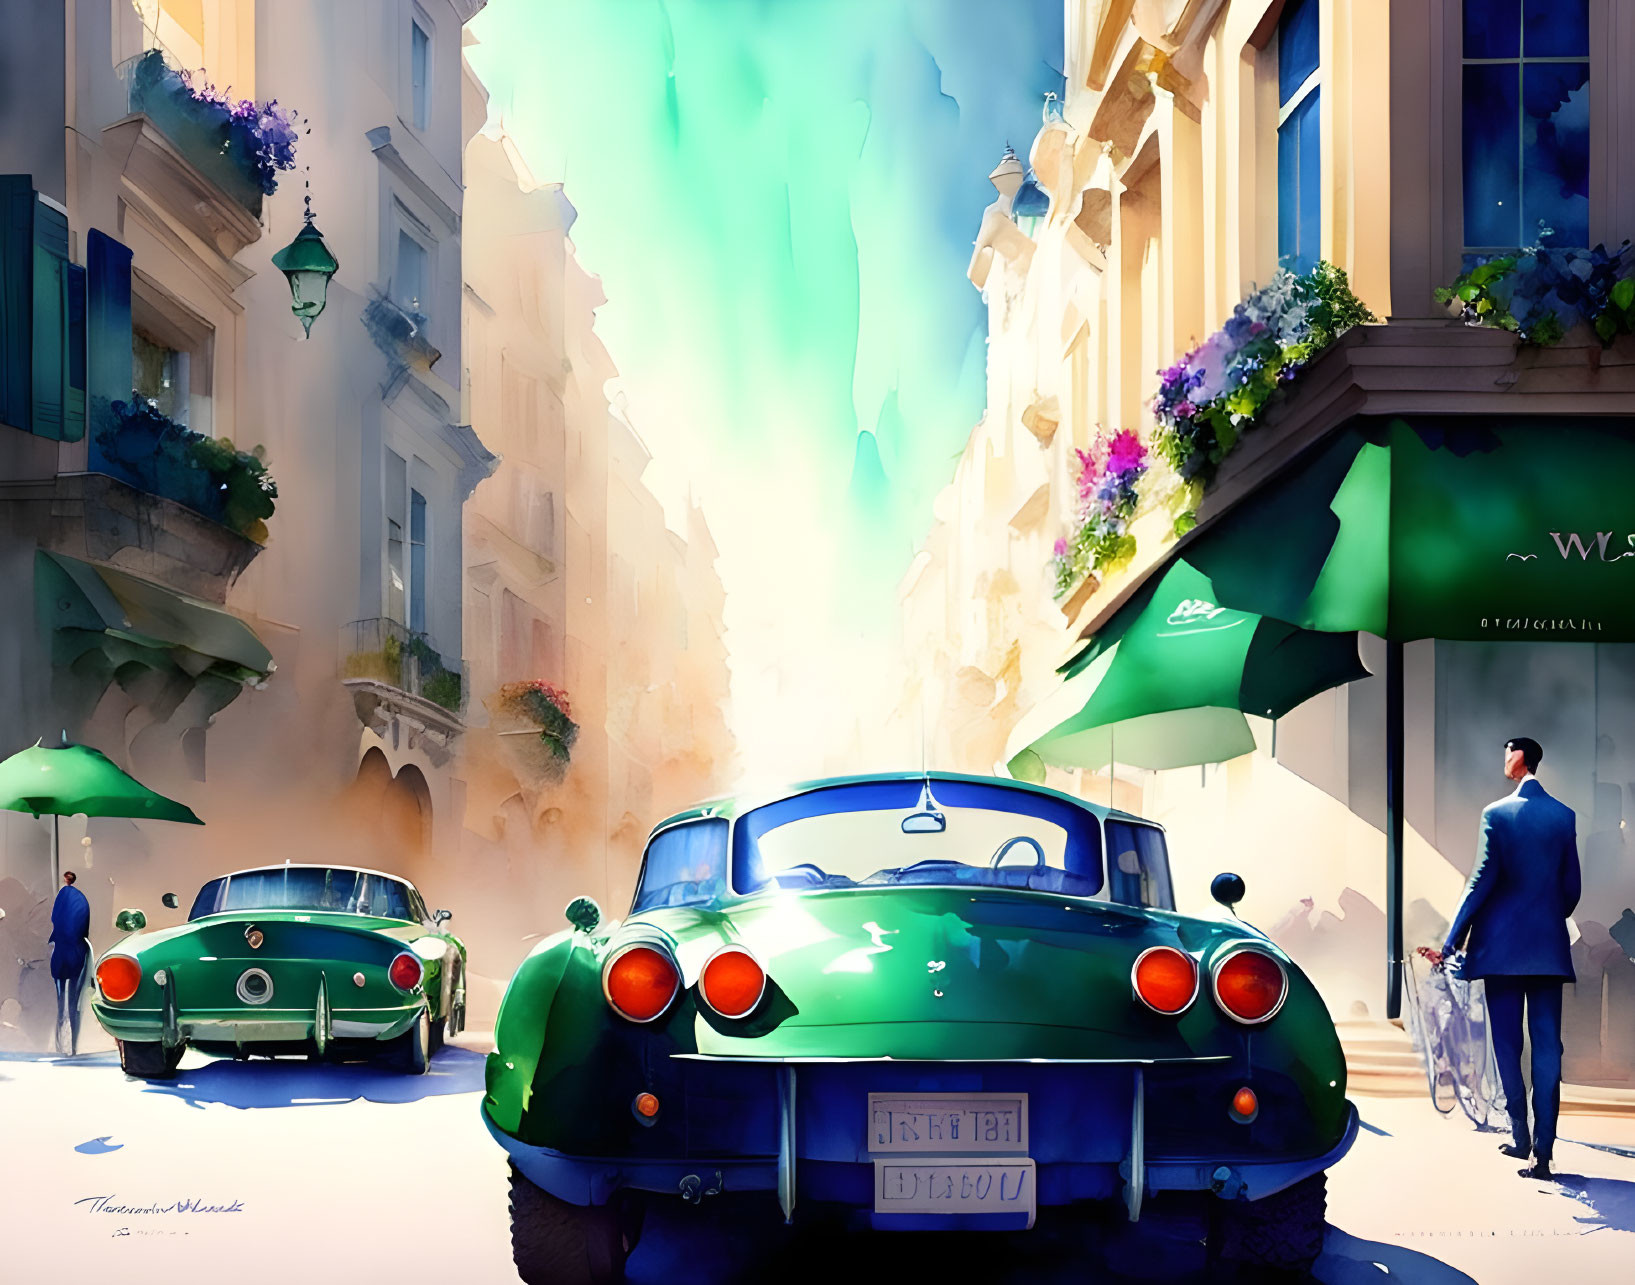 Colorful vintage street scene with cars, people, and buildings in sunlight